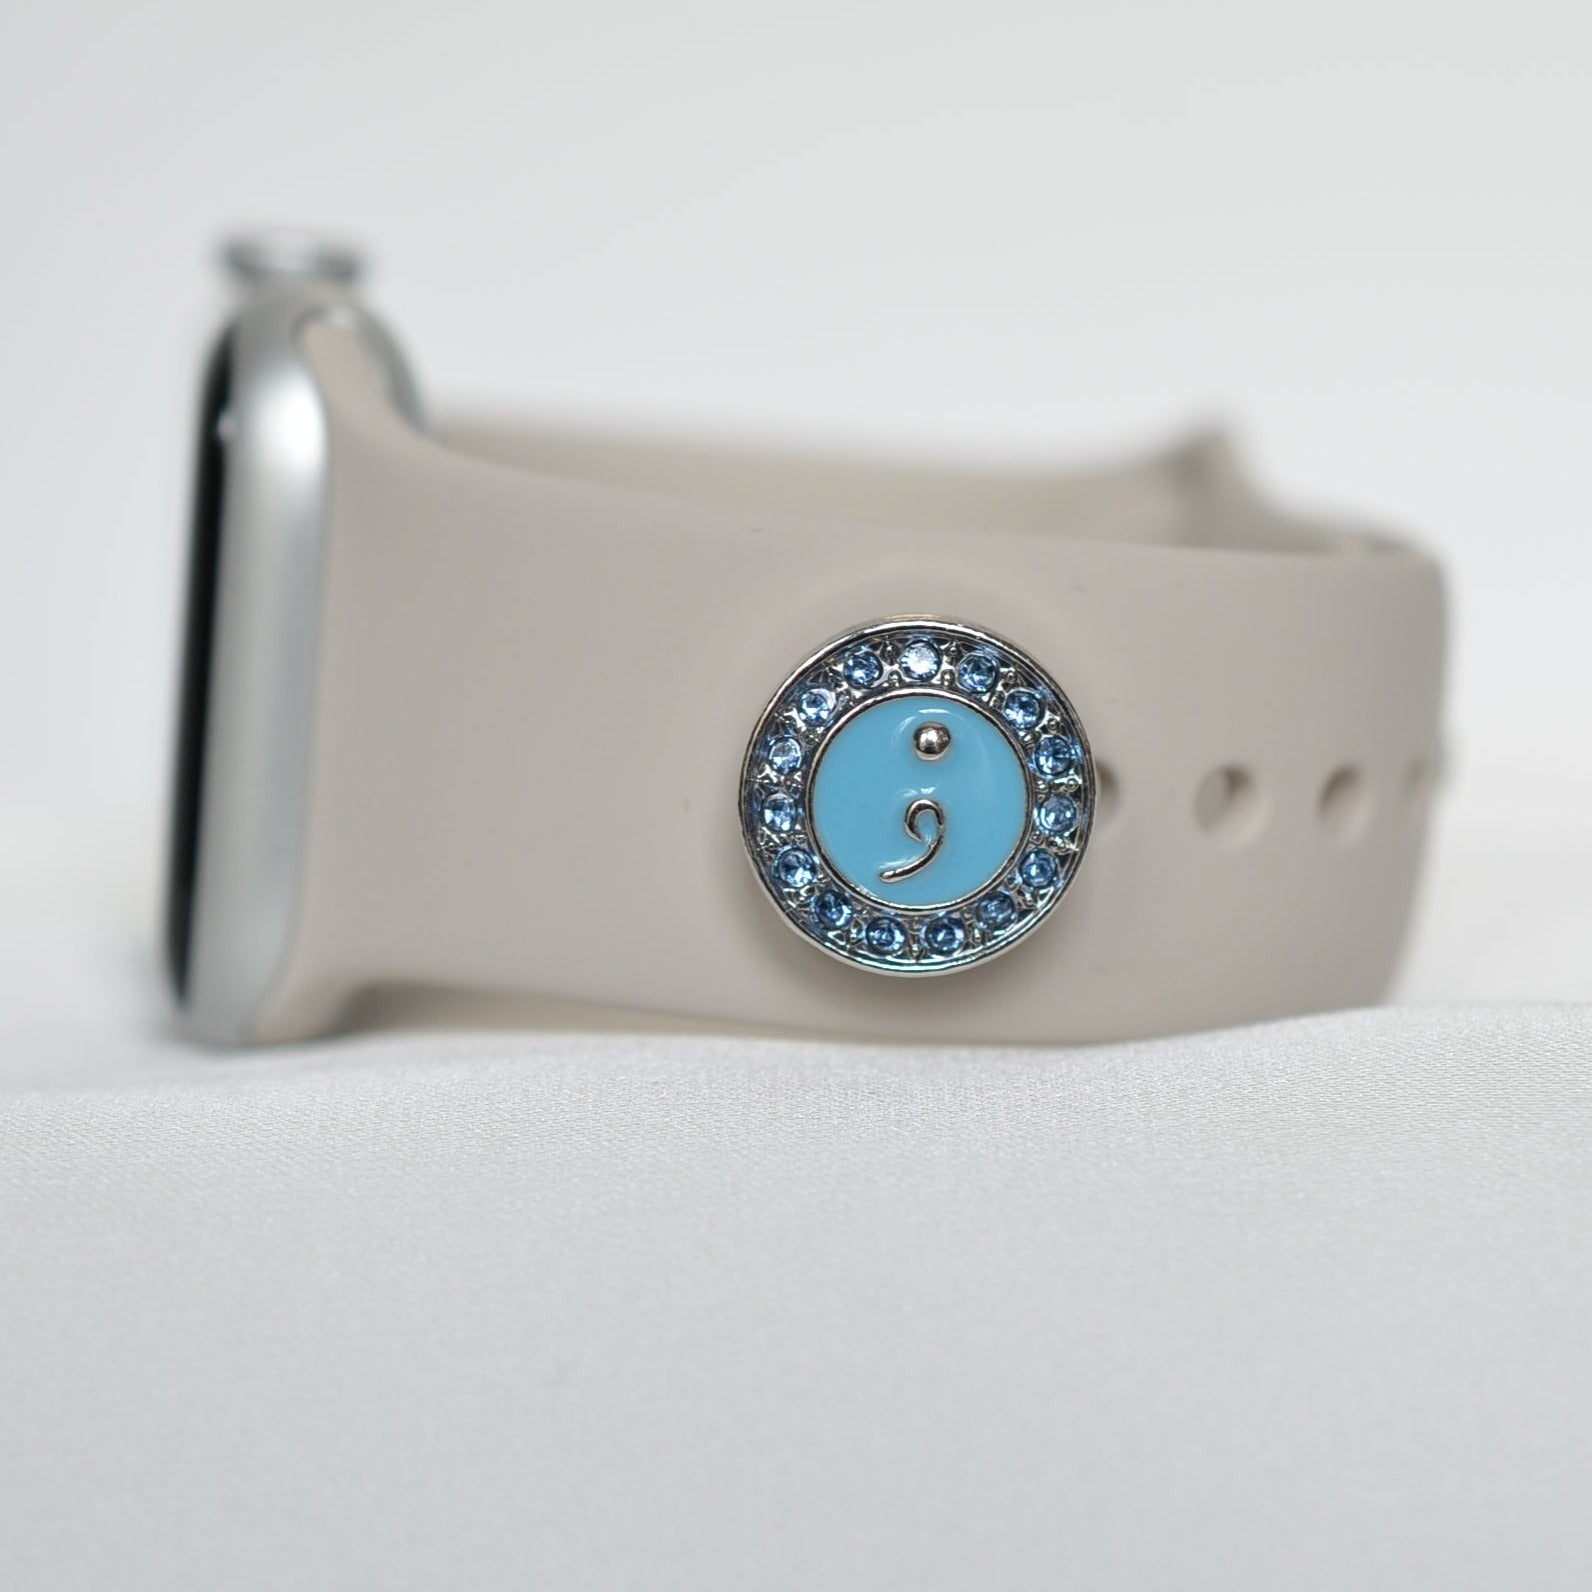 Blue Resilience Charm for Belt, Bag and Watch Bands